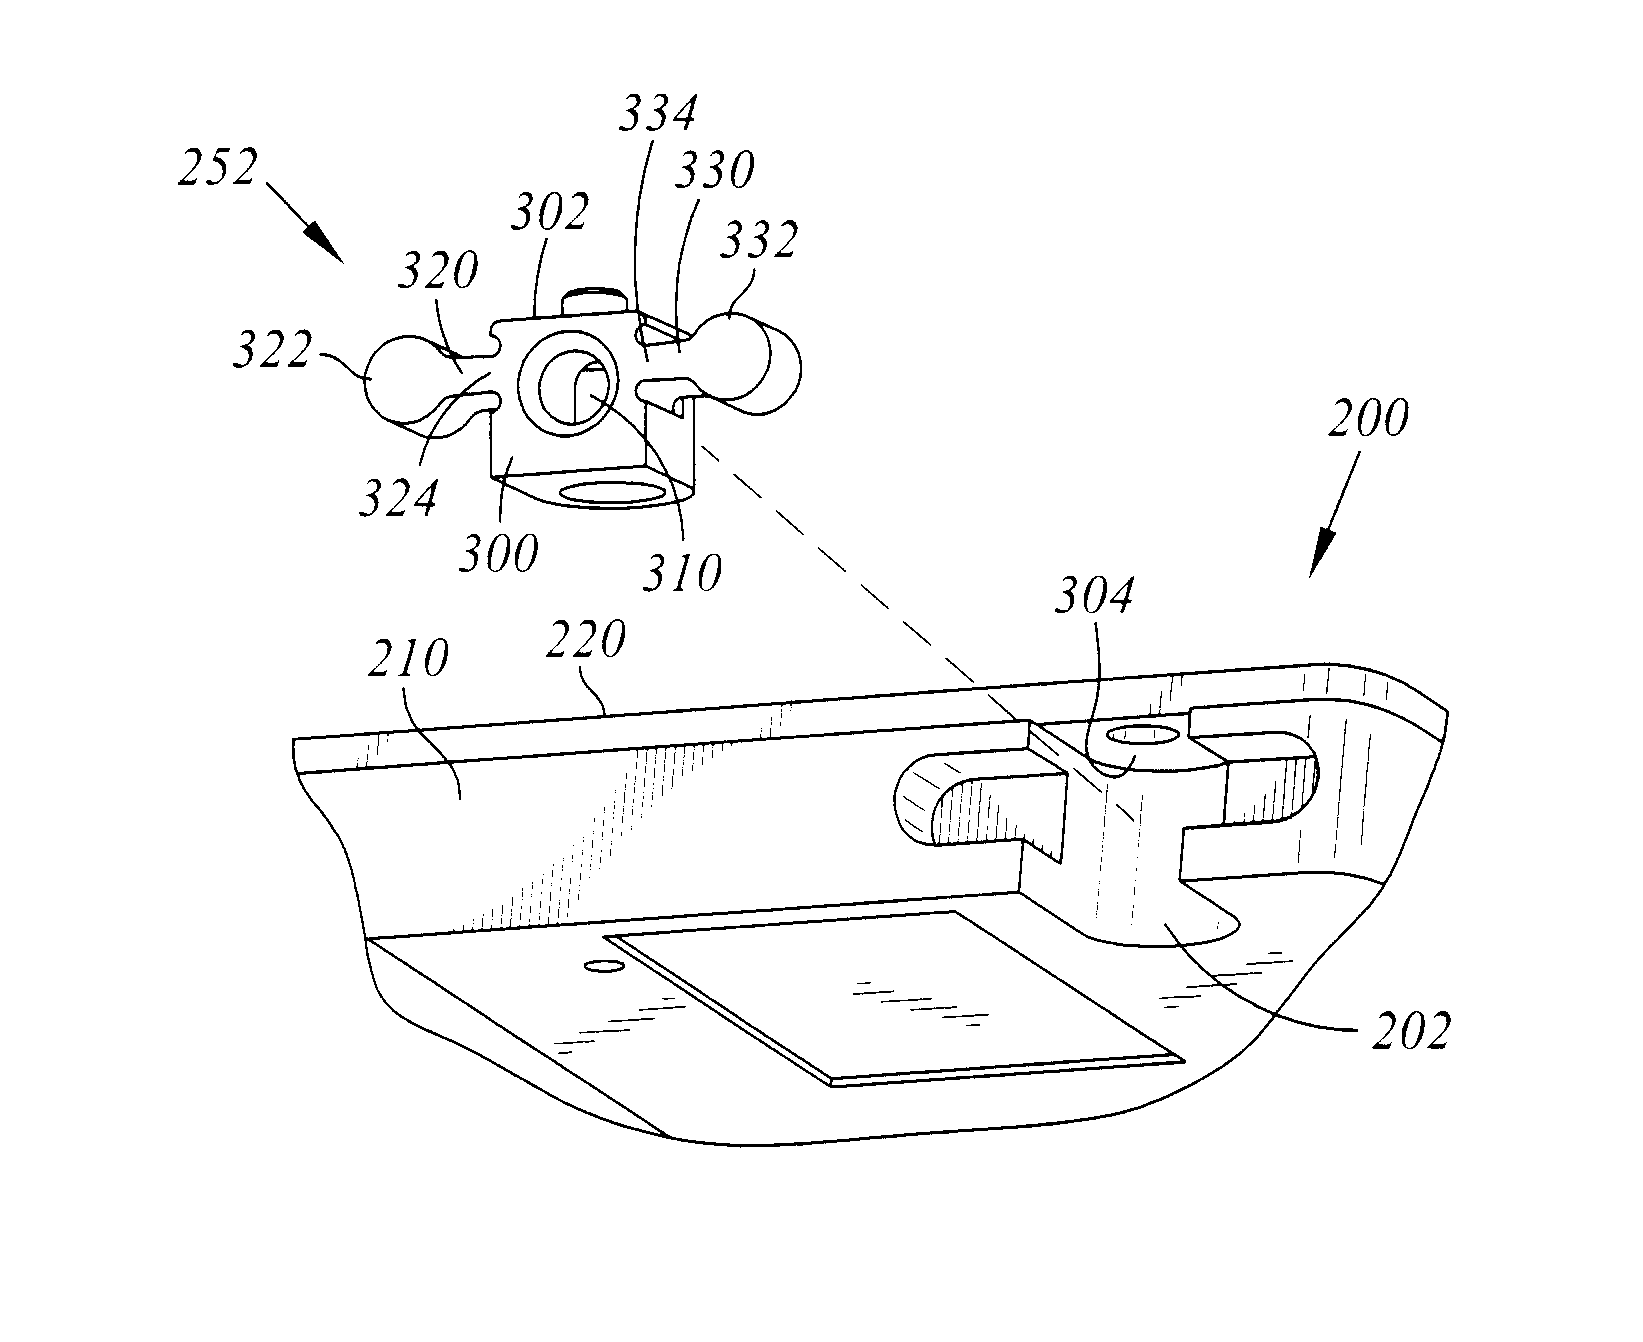 Disk drive having mounting inserts with cantilevered beams